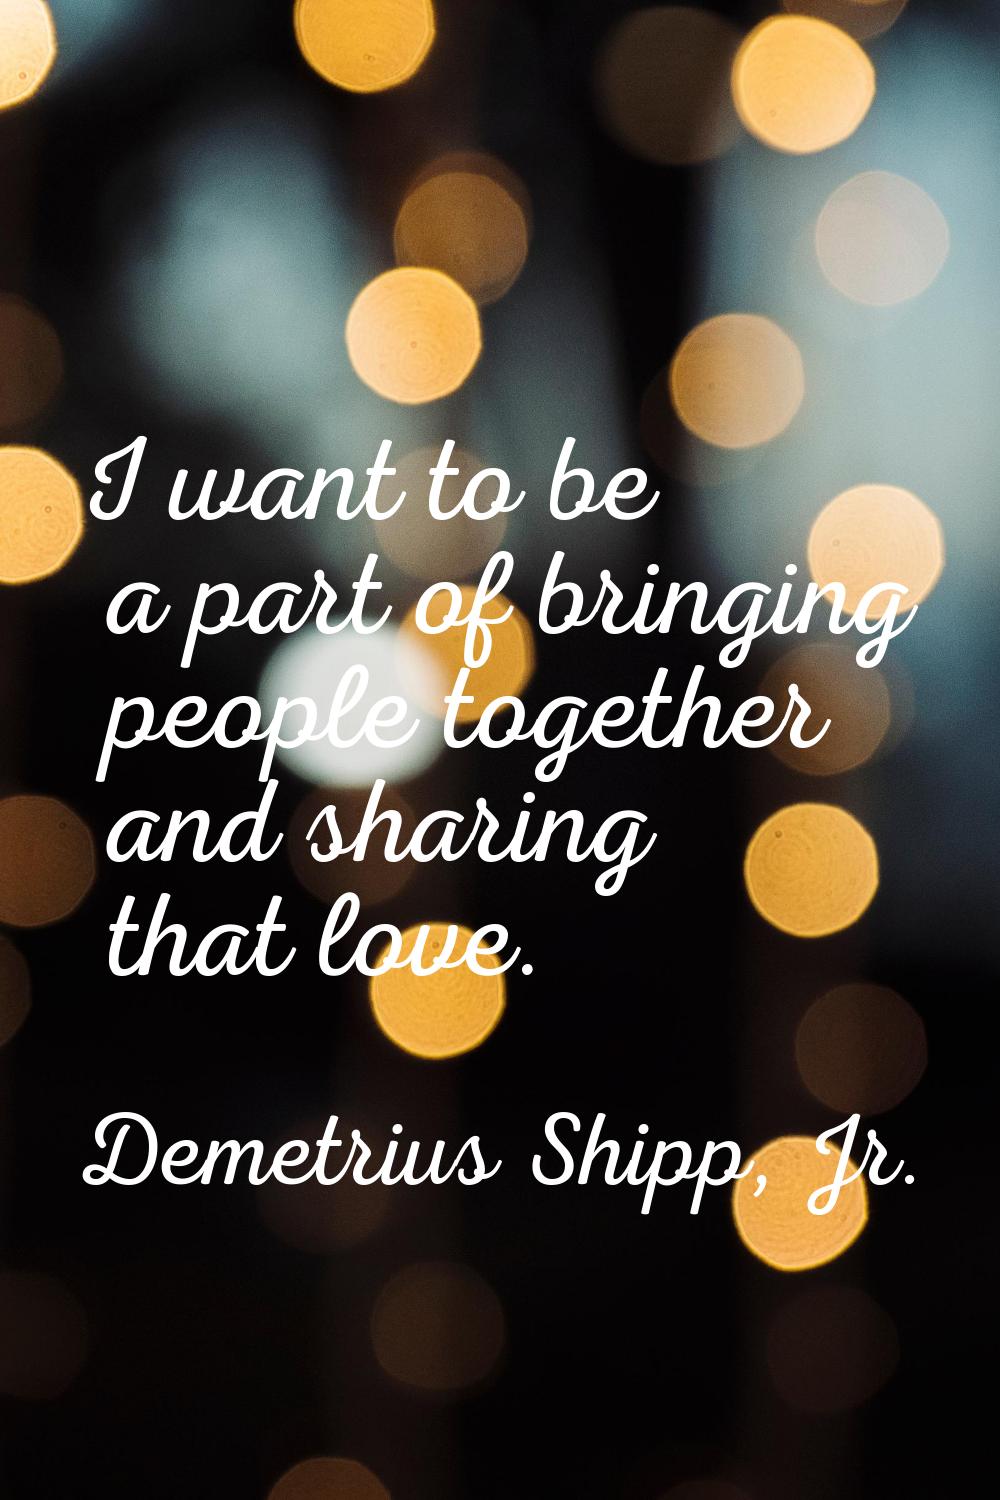 I want to be a part of bringing people together and sharing that love.